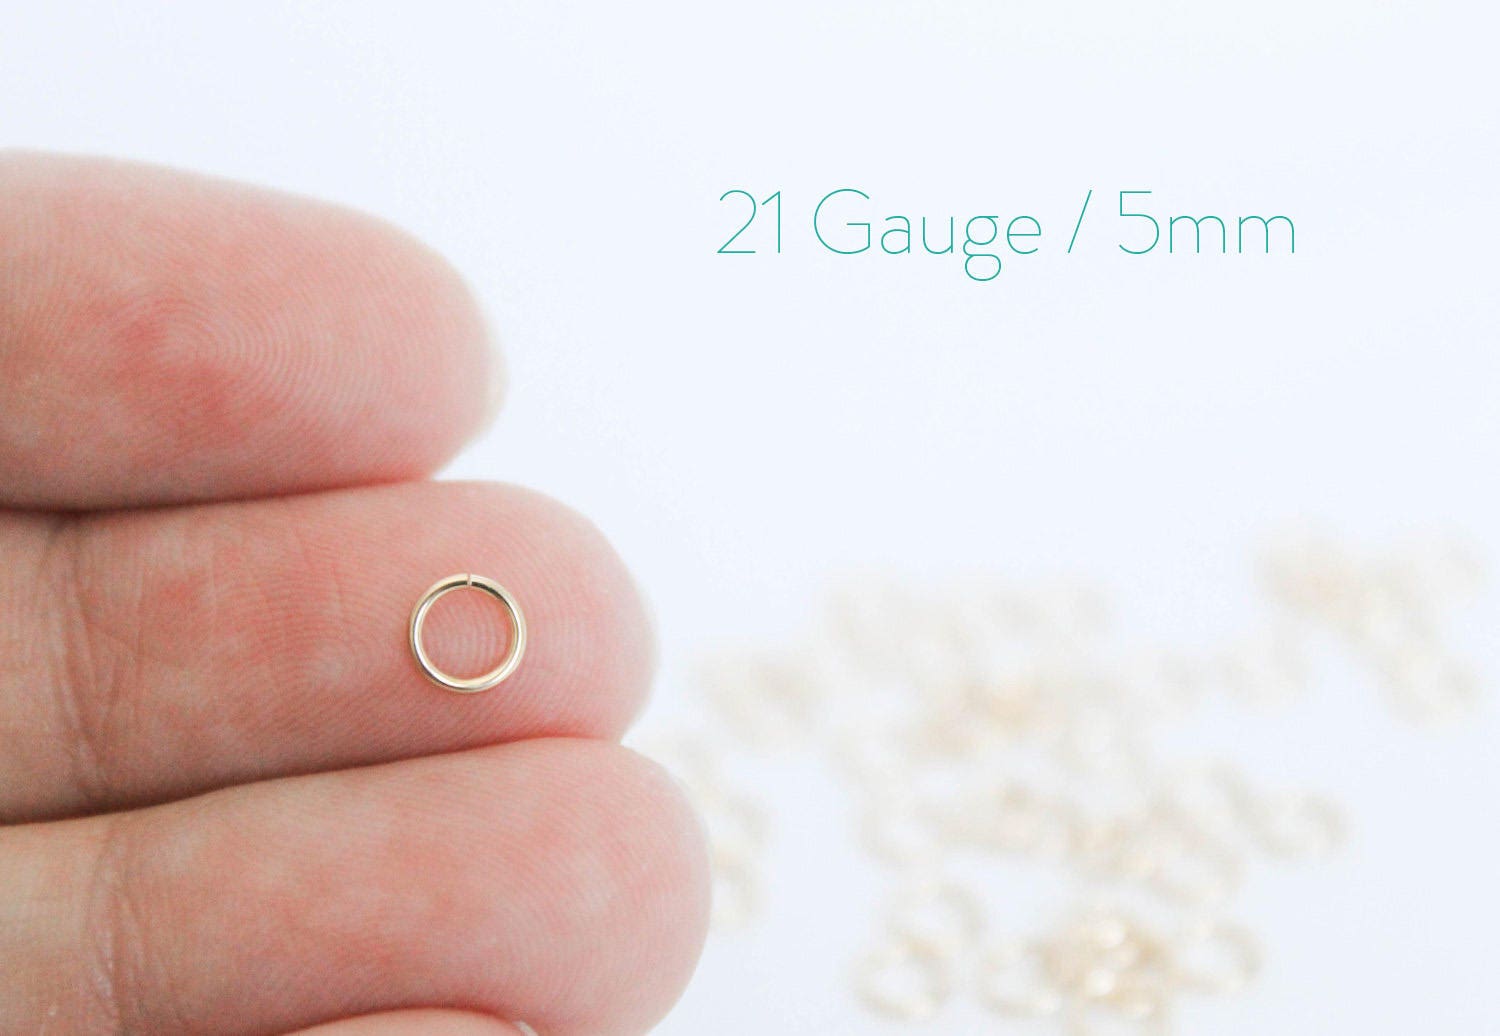 14K Gold Filled Open Jump Rings size 1.8x10 mm, Gold Filled jump rings,  Jewelry making, Jump ring, Large jump ring, Gold filled - 1 piece